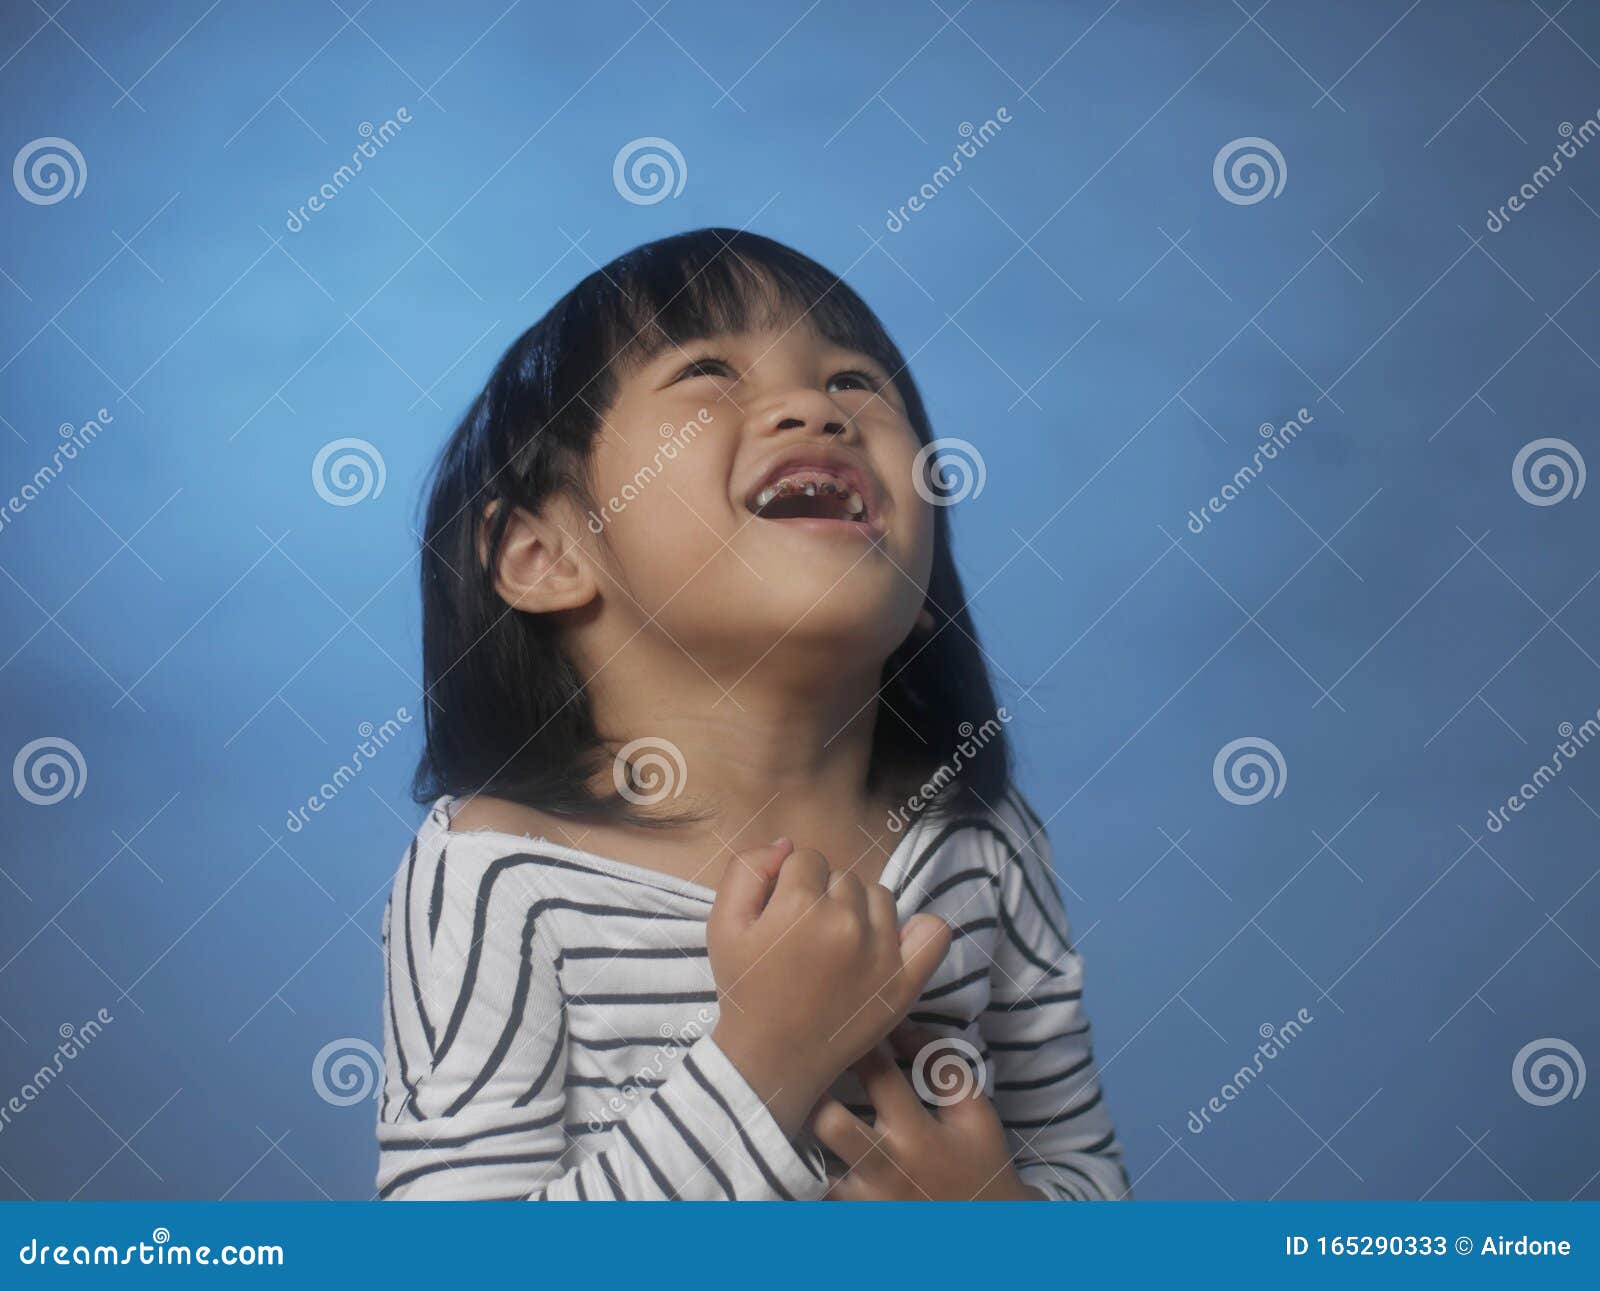 Little Girl Crying stock image. Image of cried, hurt - 165290333